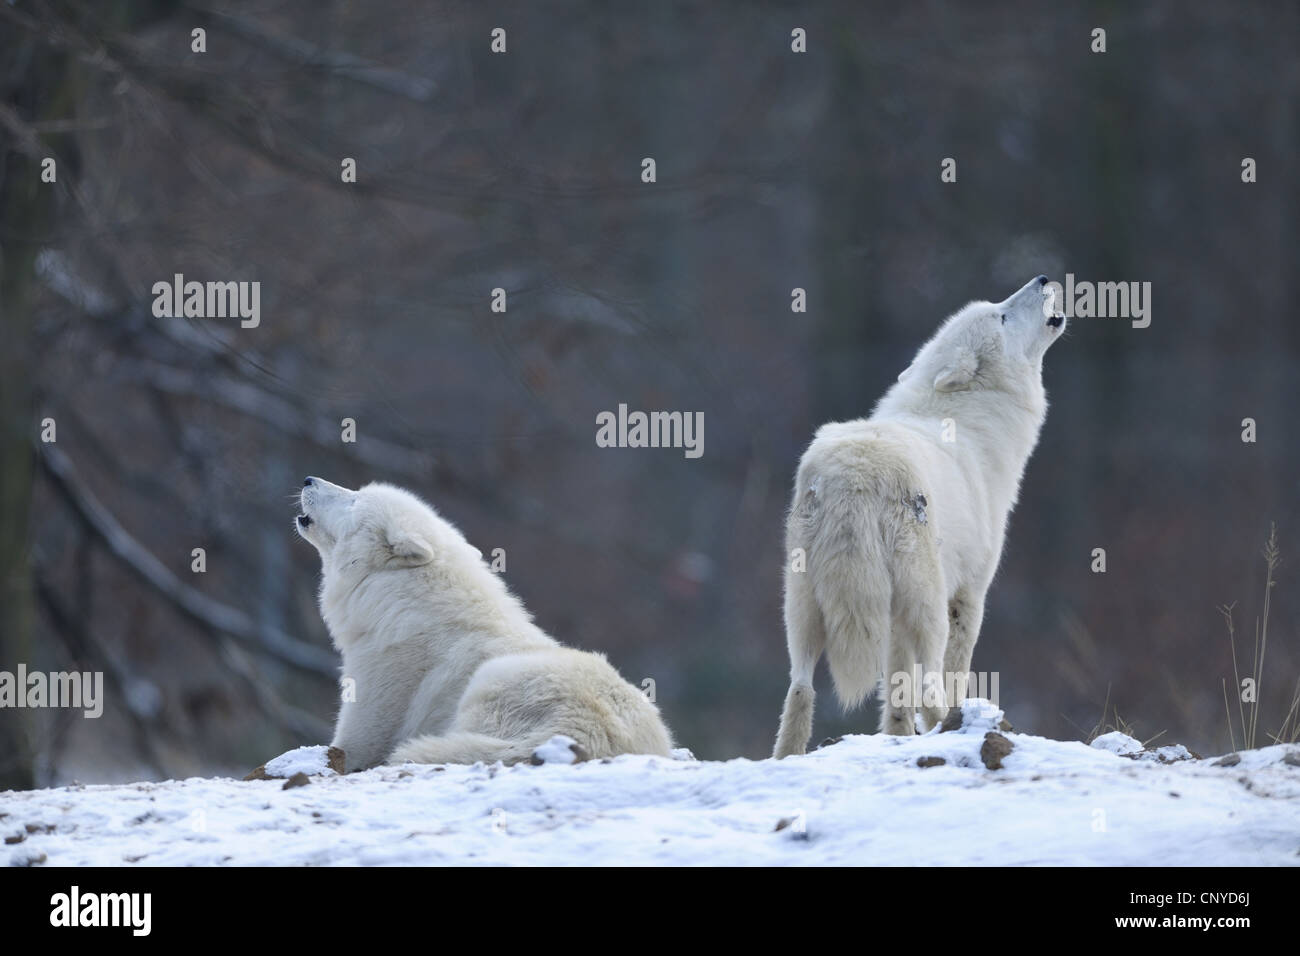 arctic wolf, tundra wolf (Canis lupus albus, Canis lupus arctos), two howling artic wolves in snow, view from behind Stock Photo